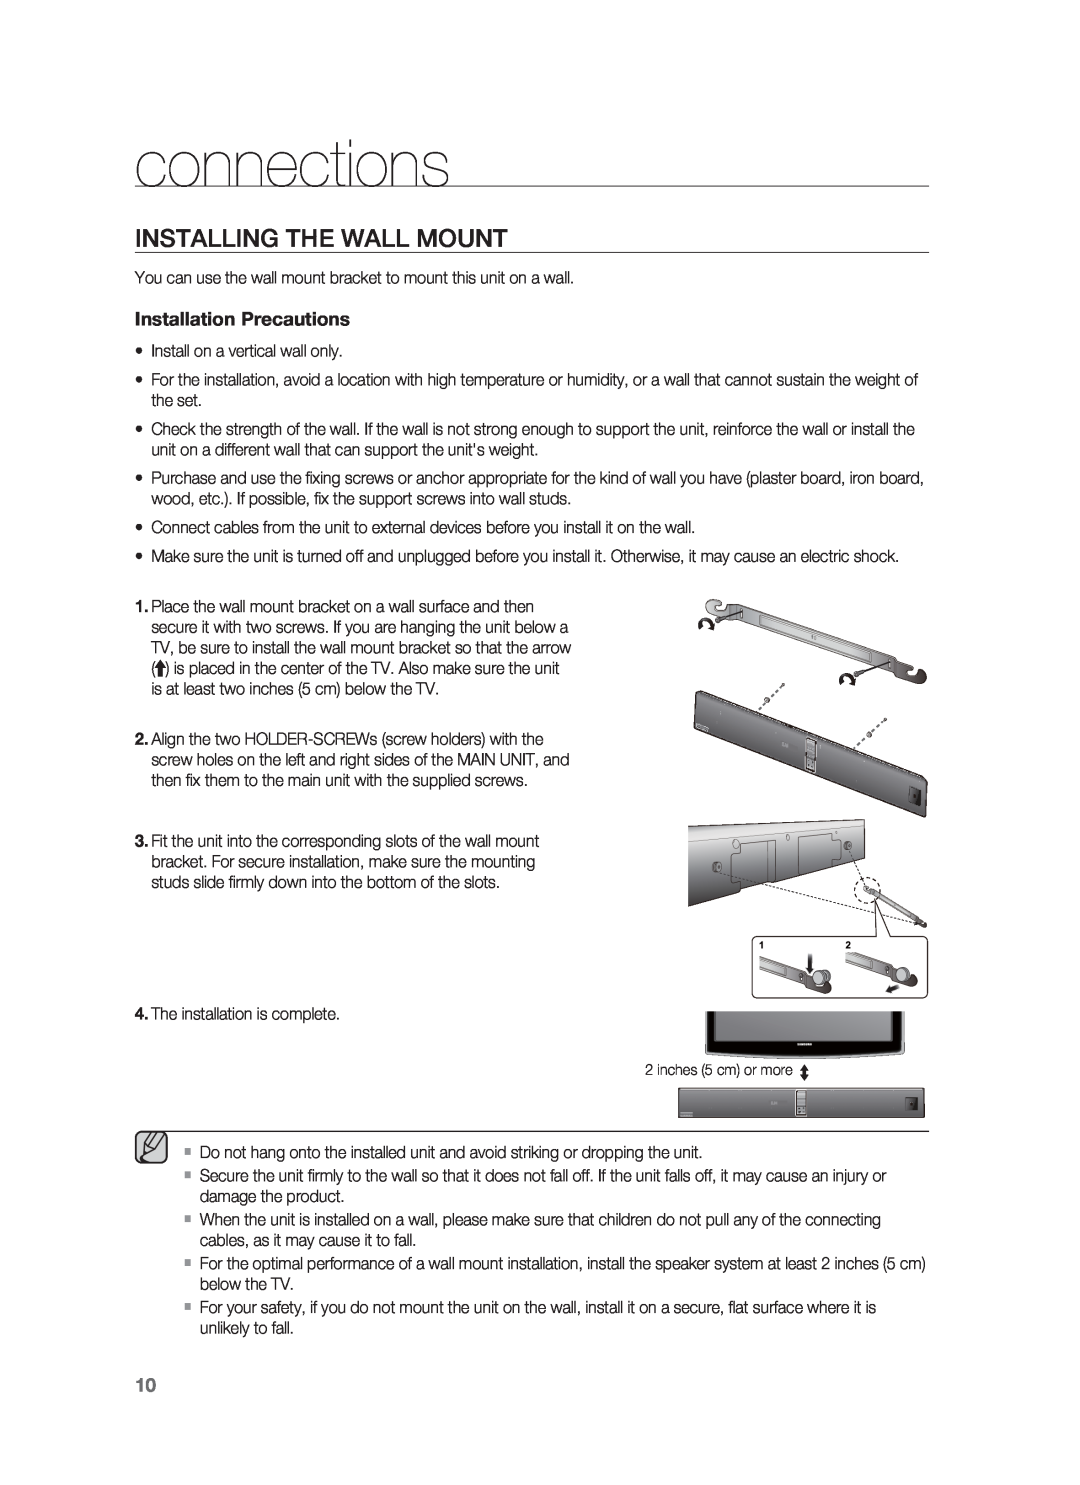 Samsung HW-F850/ZA user manual connections, Installing The Wall Mount, Installation Precautions 